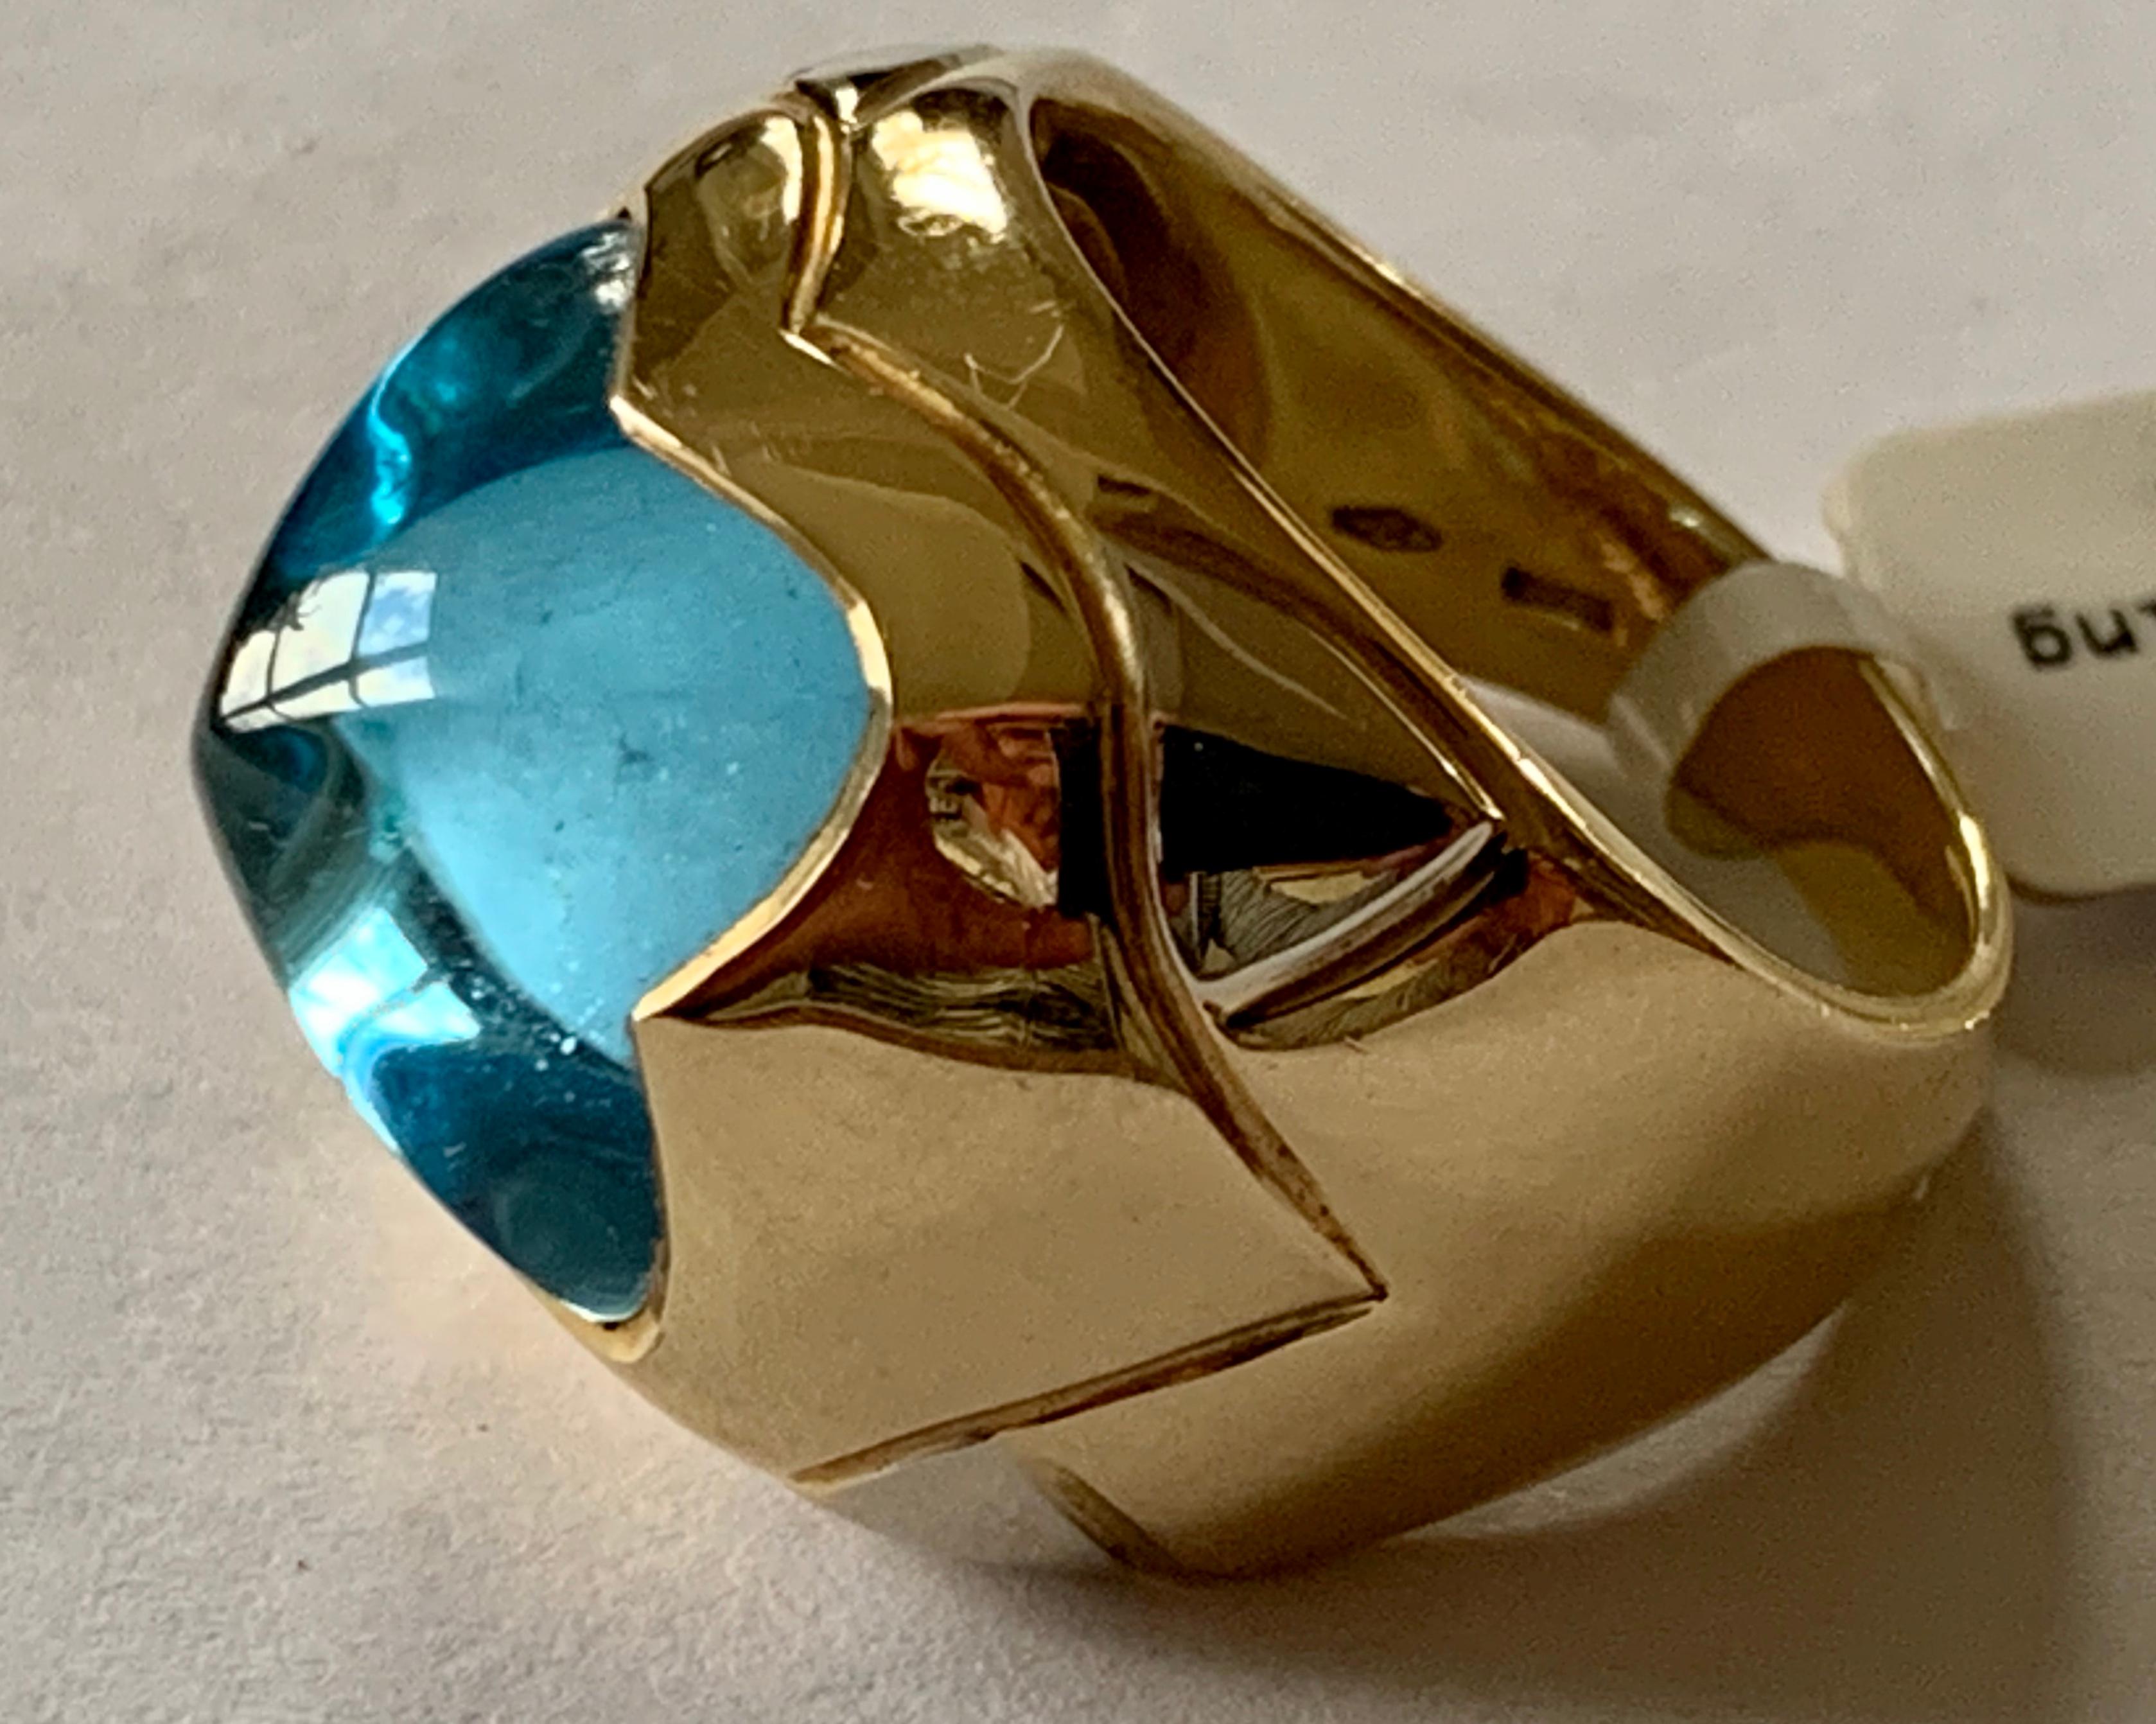 A Bulgari Piramyde XL Blue Topaz ring in 18 K yellow Gold, set with a sugar loaf cut Blue Topaz, weighing approximately 8.00ct, signed Bulgari, with maker’s mark. 
The ring is currently size 55/15 but can be resized larger or smaller if necessary.